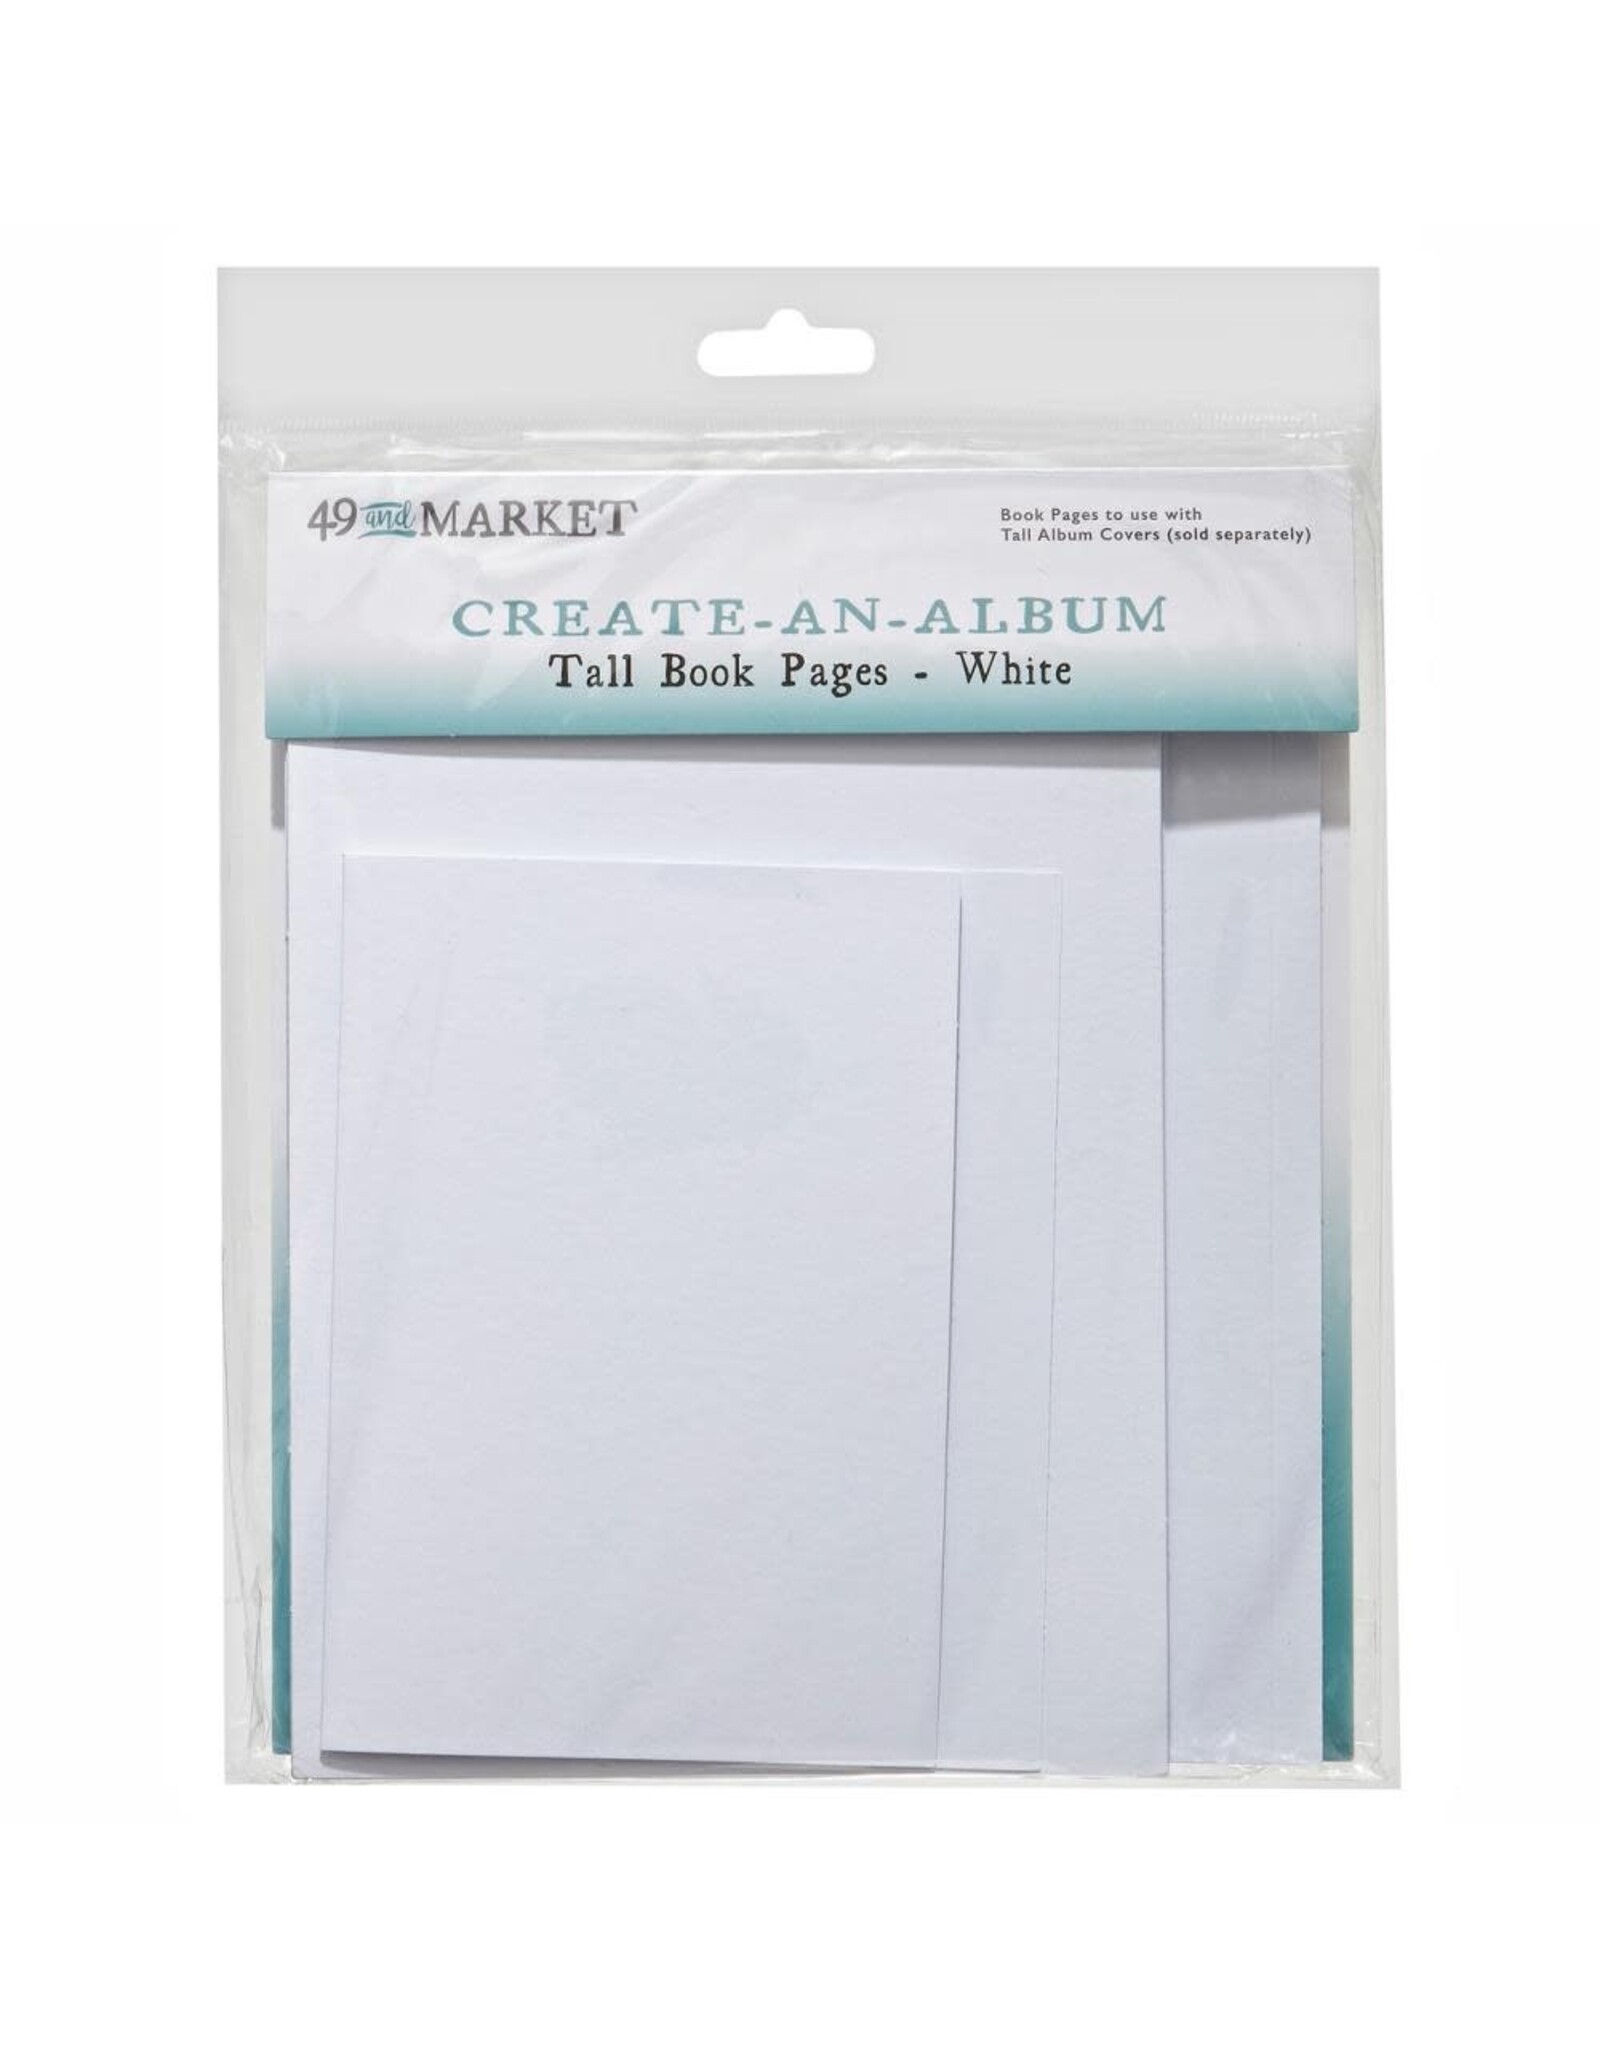 49 AND MARKET 49 AND MARKET CREATE-AN-ALBUM TALL BOOK PAGES WHITE